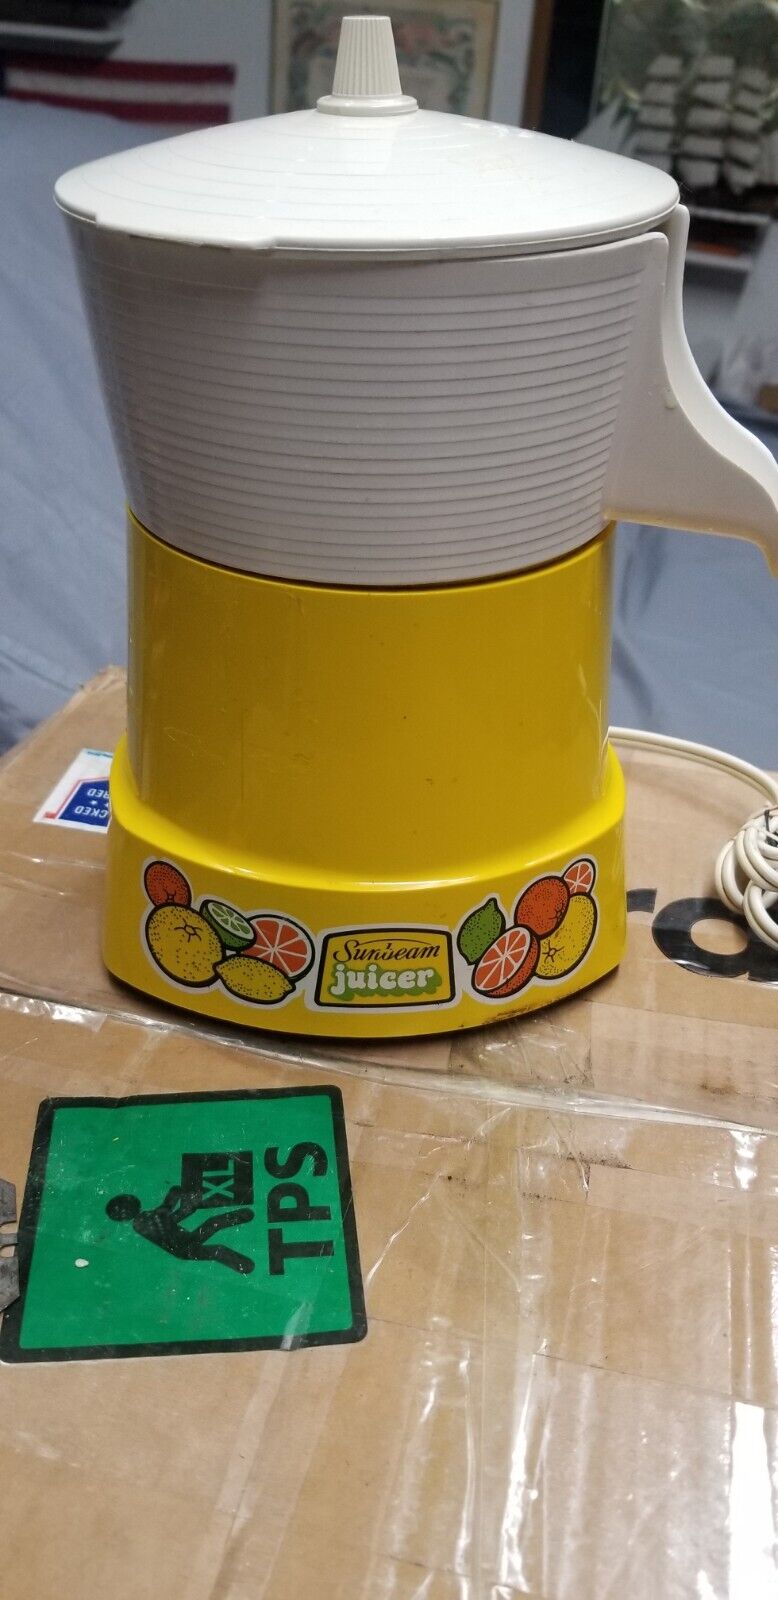 Vintage Sunbeam Juicer Mixer Yellow RARE- Tested-Free Shipping here 🌞🌞🌞🌞🌞